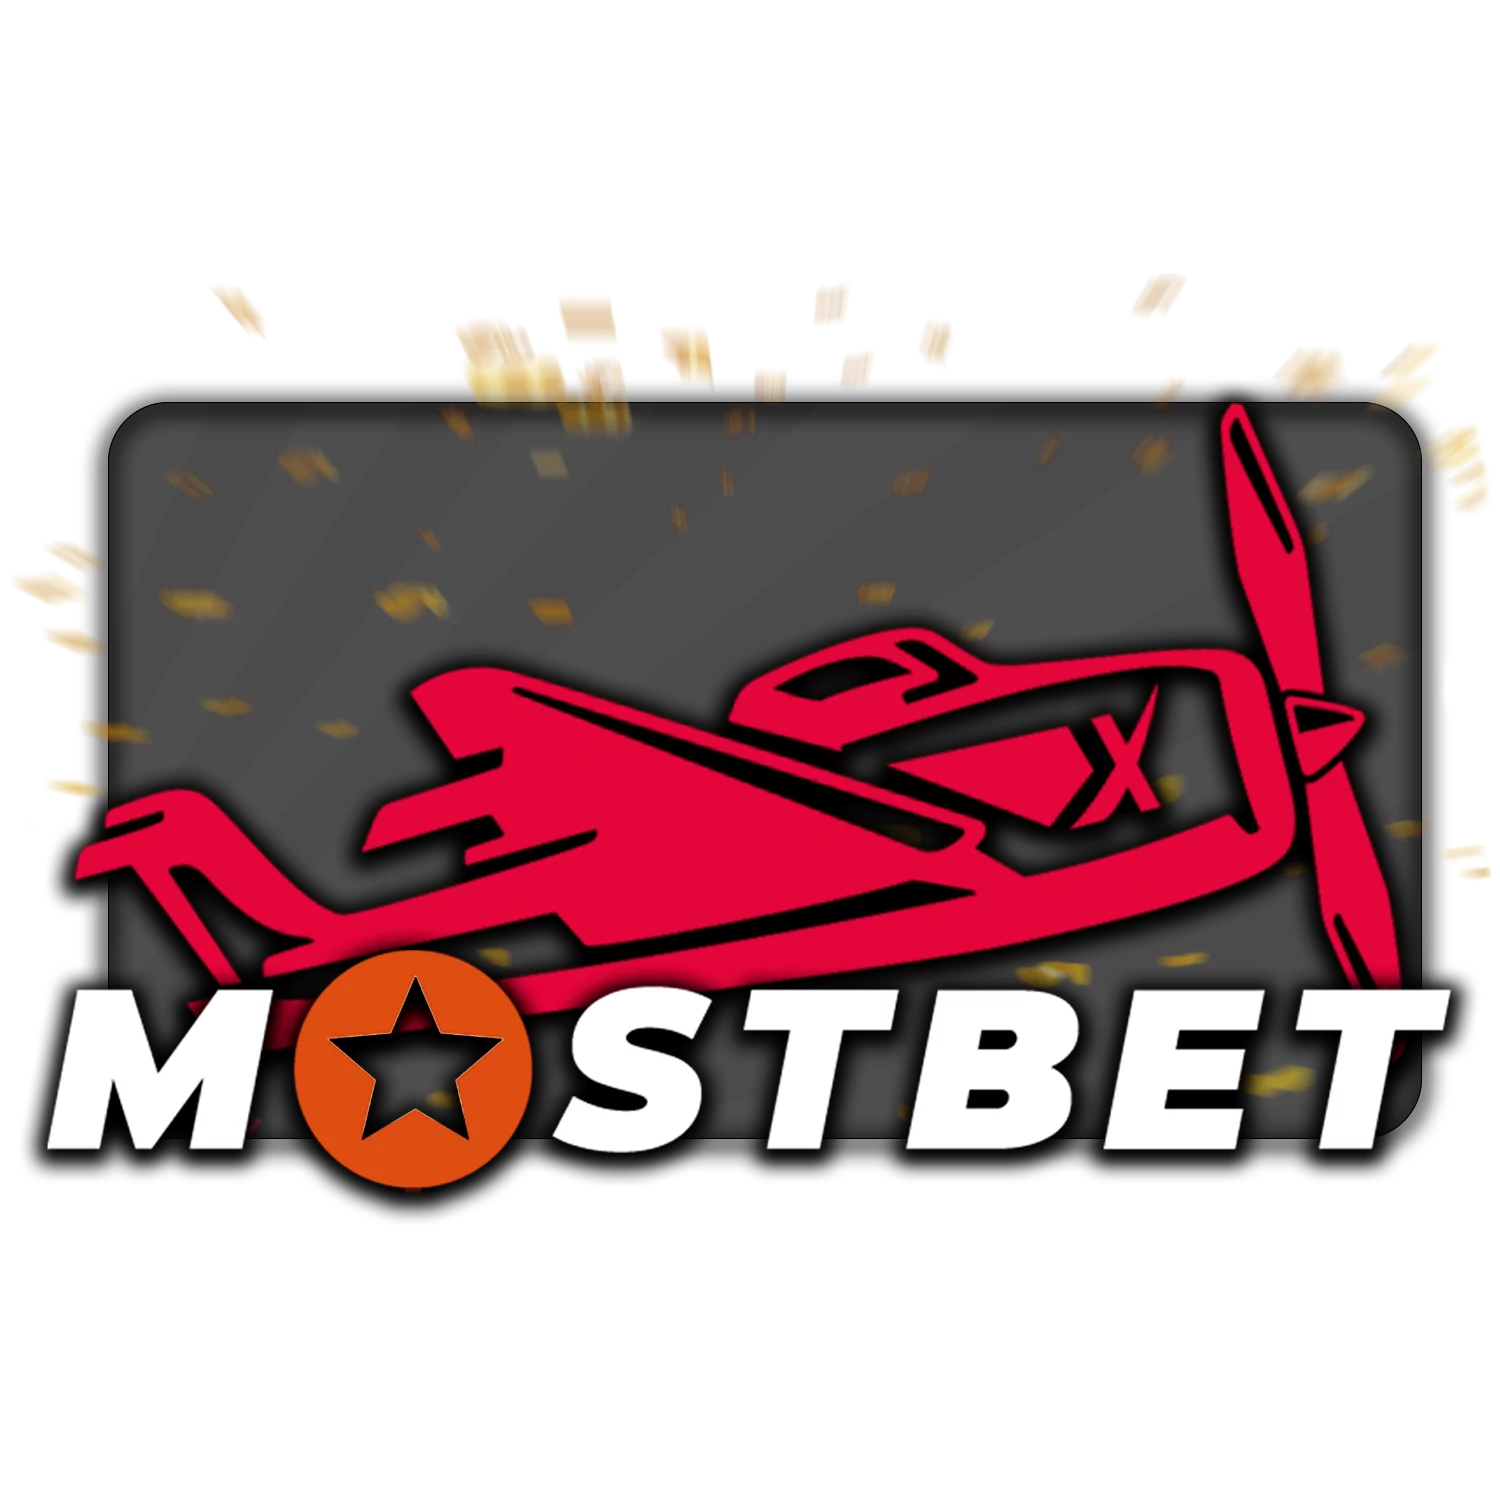 Mostbet Betting Company and Casino in Egypt - It Never Ends, Unless...